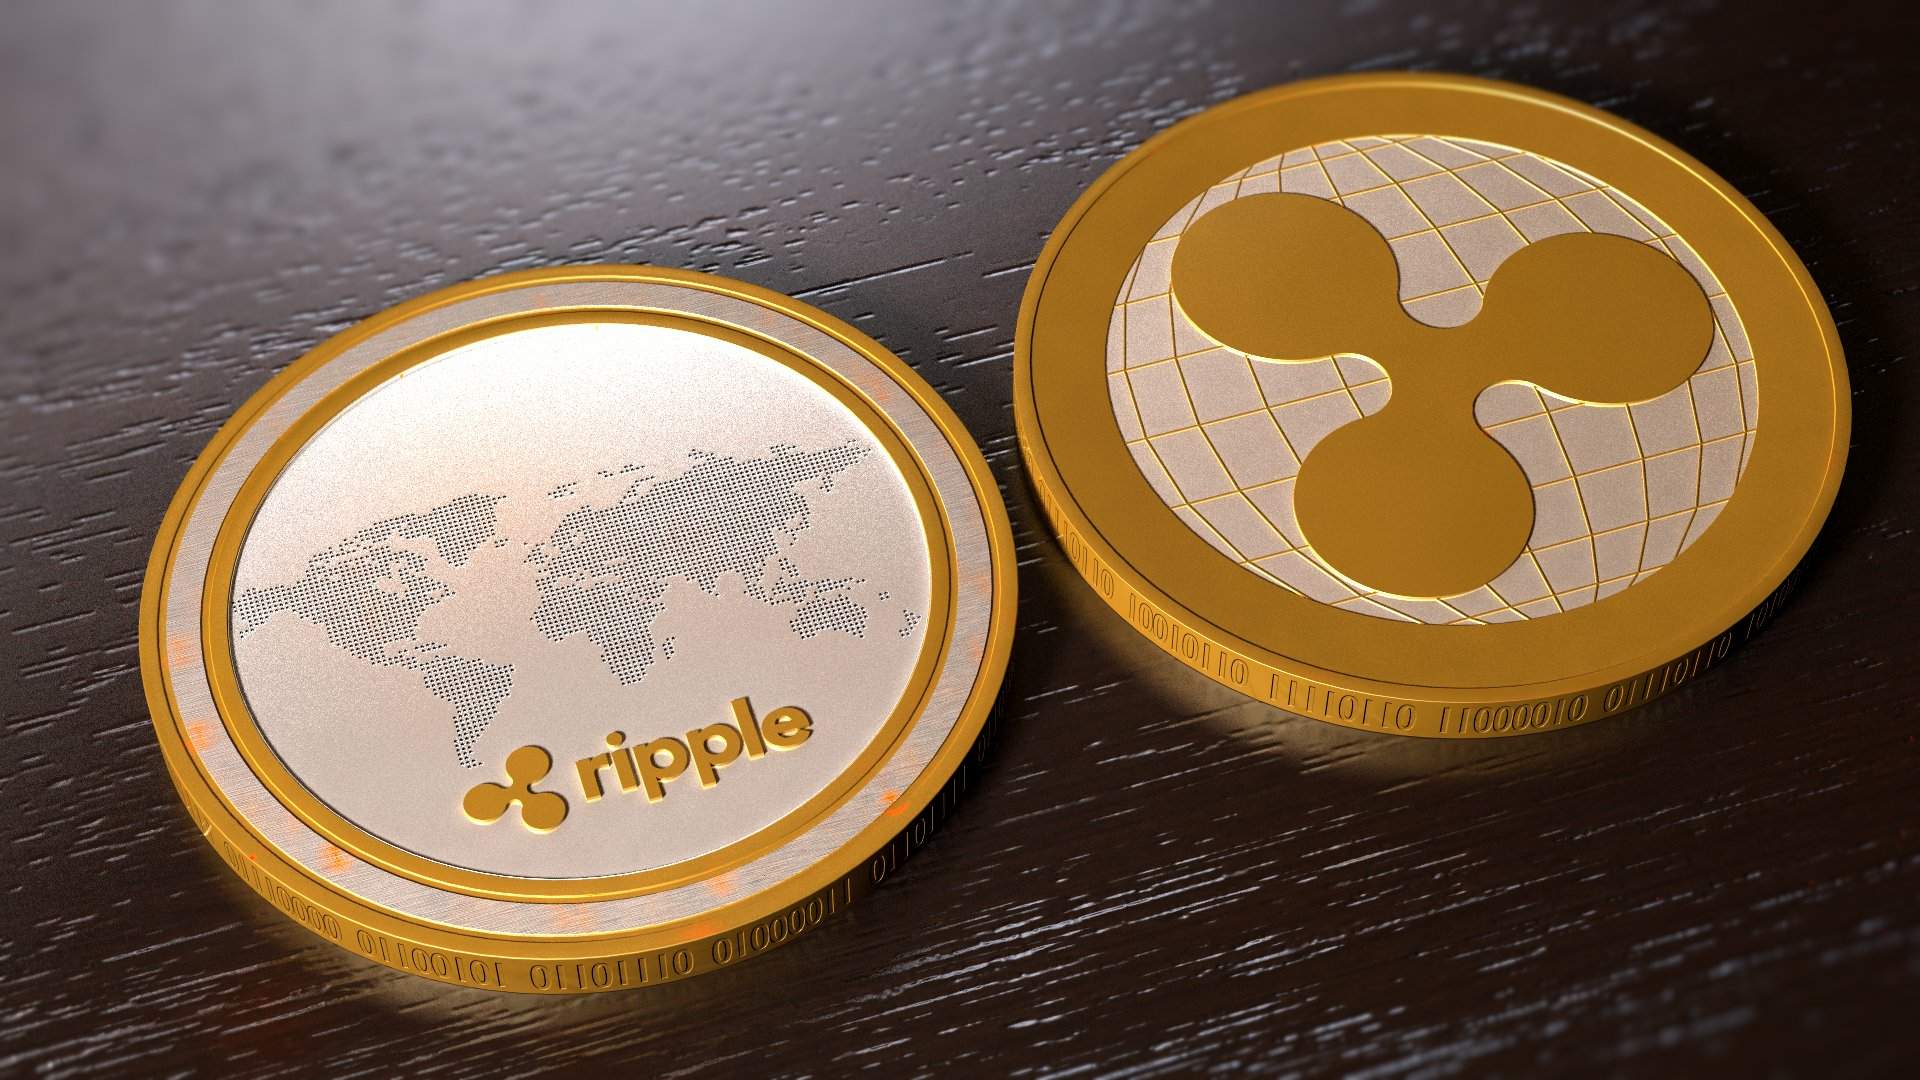 Ripple cryptocurrency hits a record high above $3